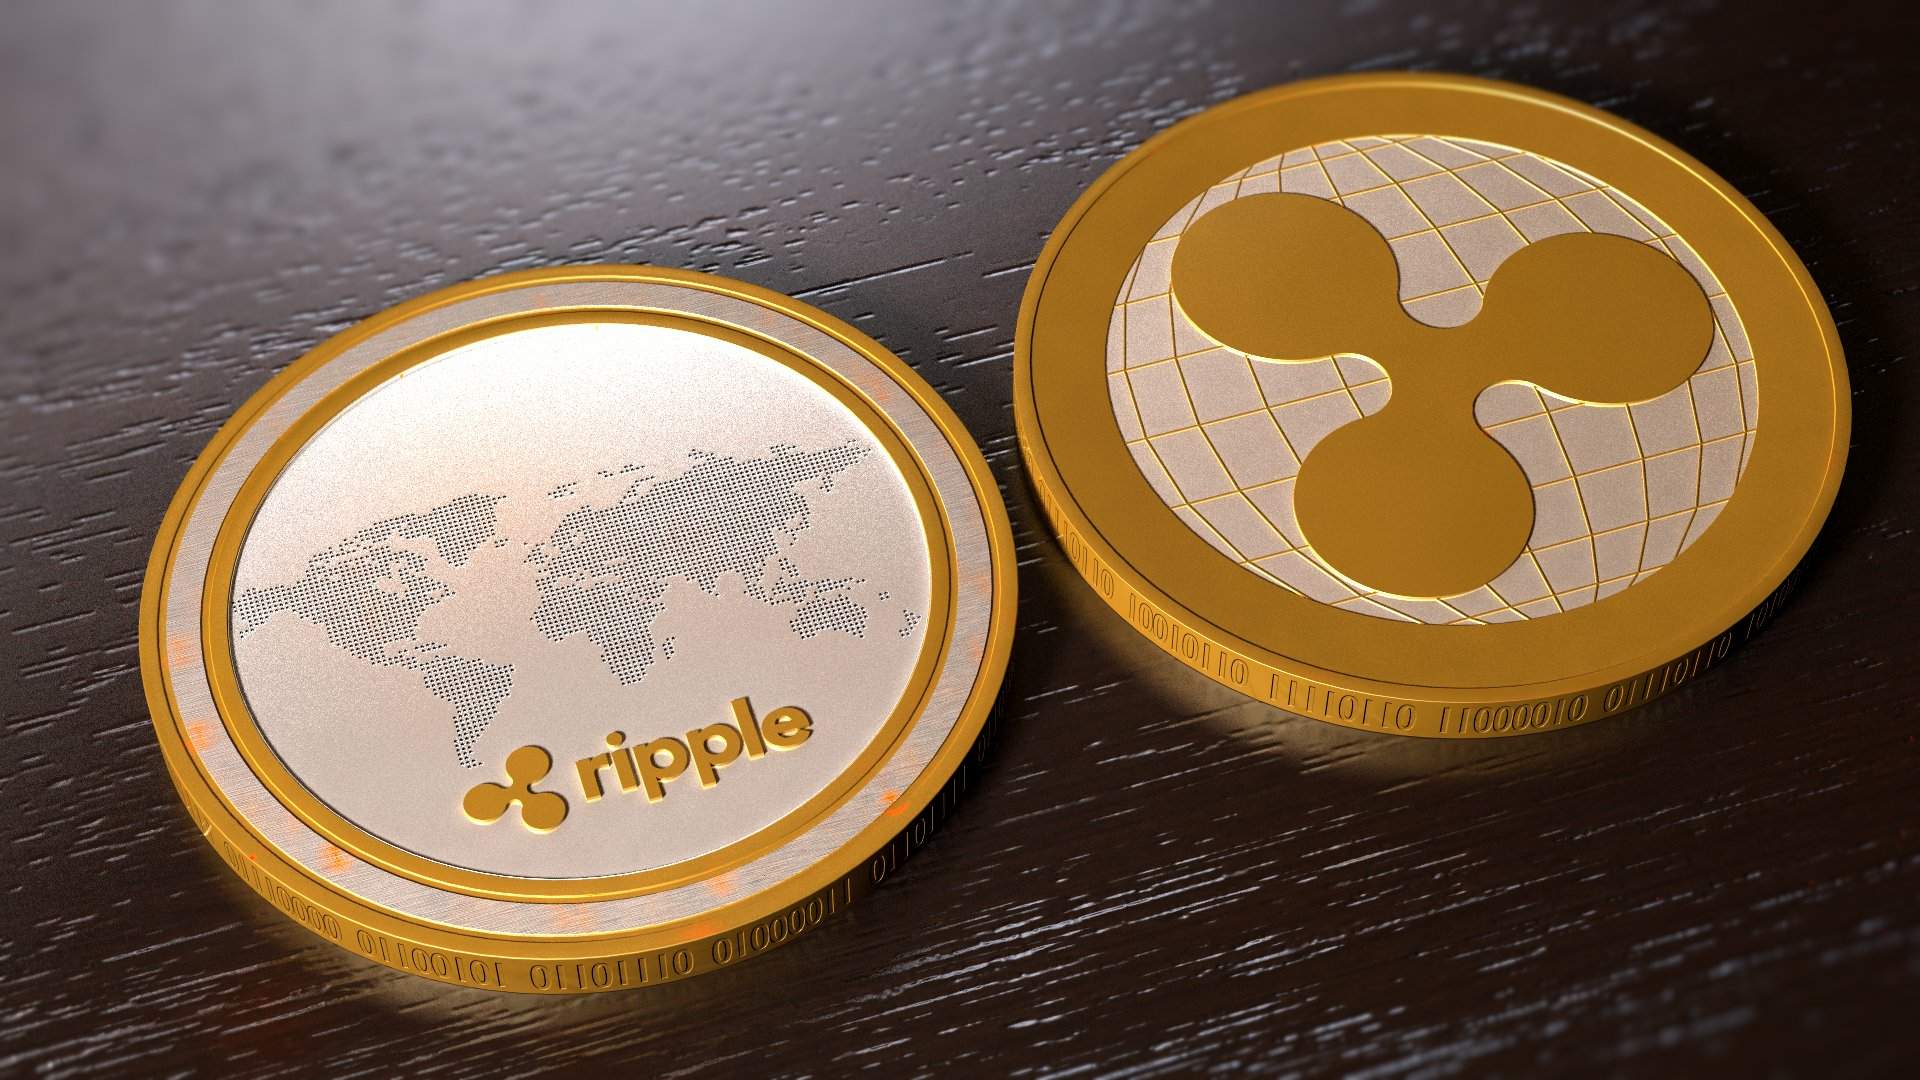 Ripple cryptocurrency hits a record high above $3